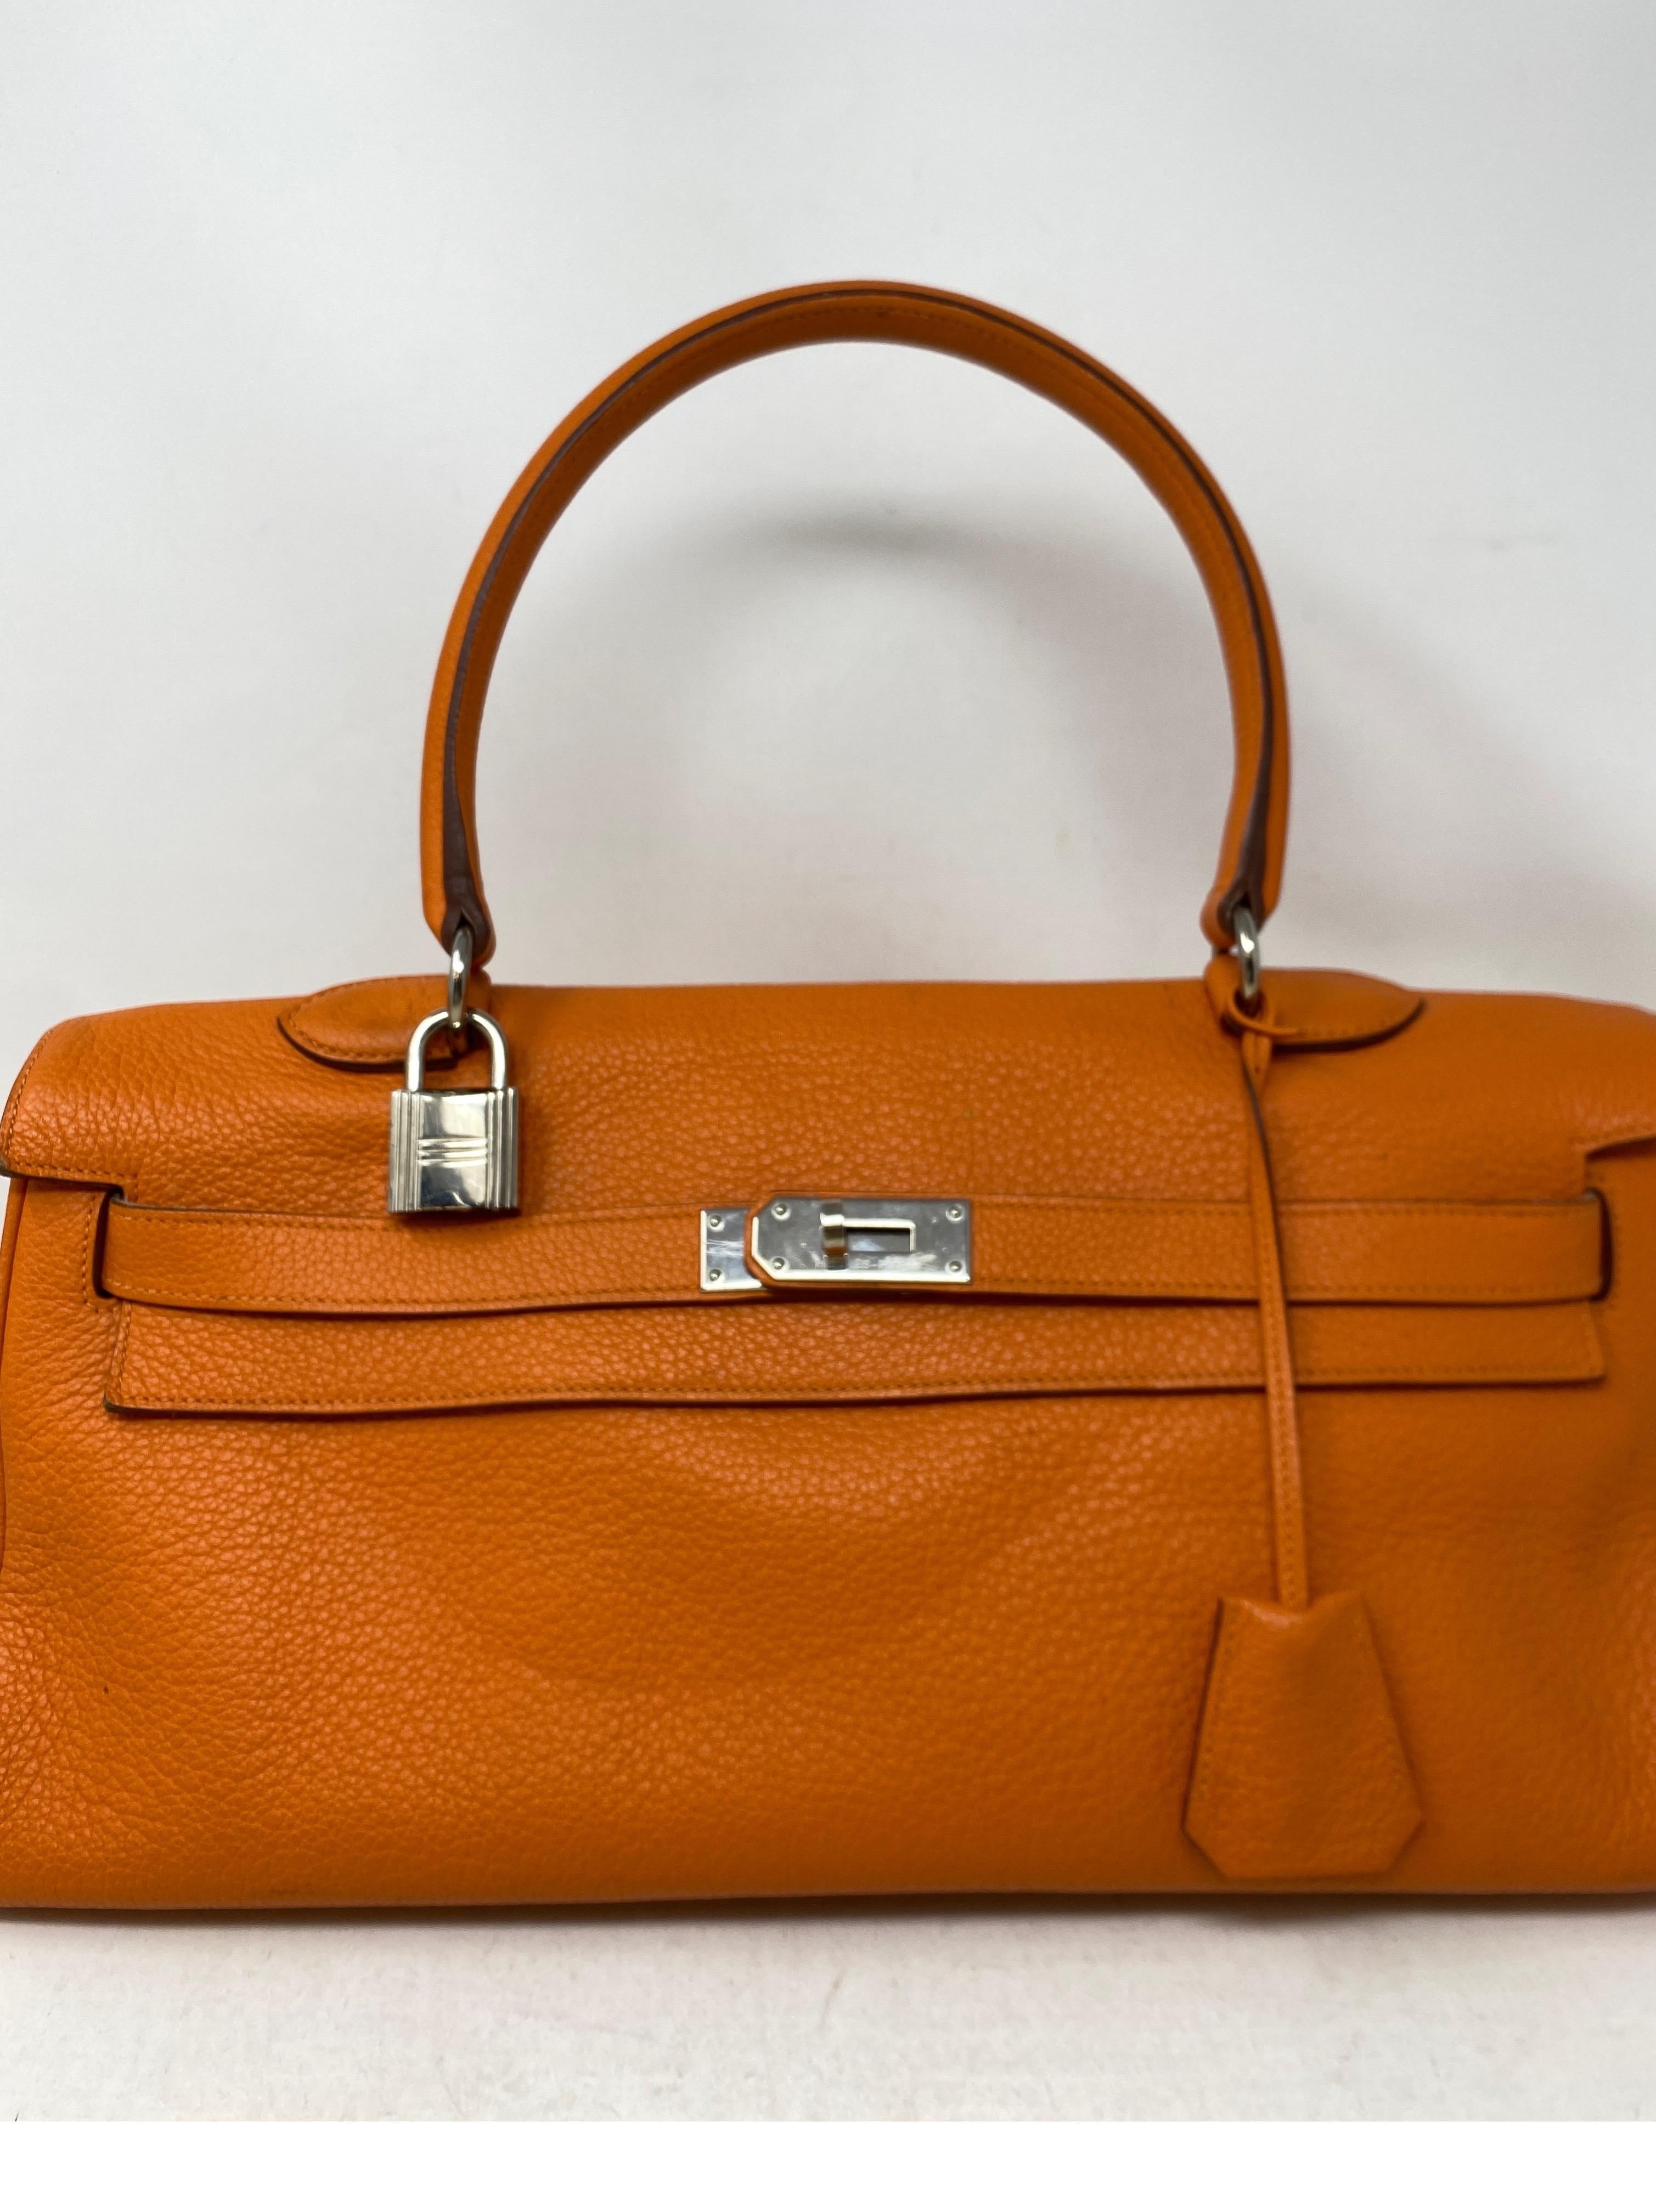 Hermes JPG Orange Bag. Rare unique looking size Hermes bag. Shoulder bag with palladium hardware. Good condition. Some wear on leather. Please see photos. Light corner scuff. Slight indention in the front. Classic Hermes orange color. Interior